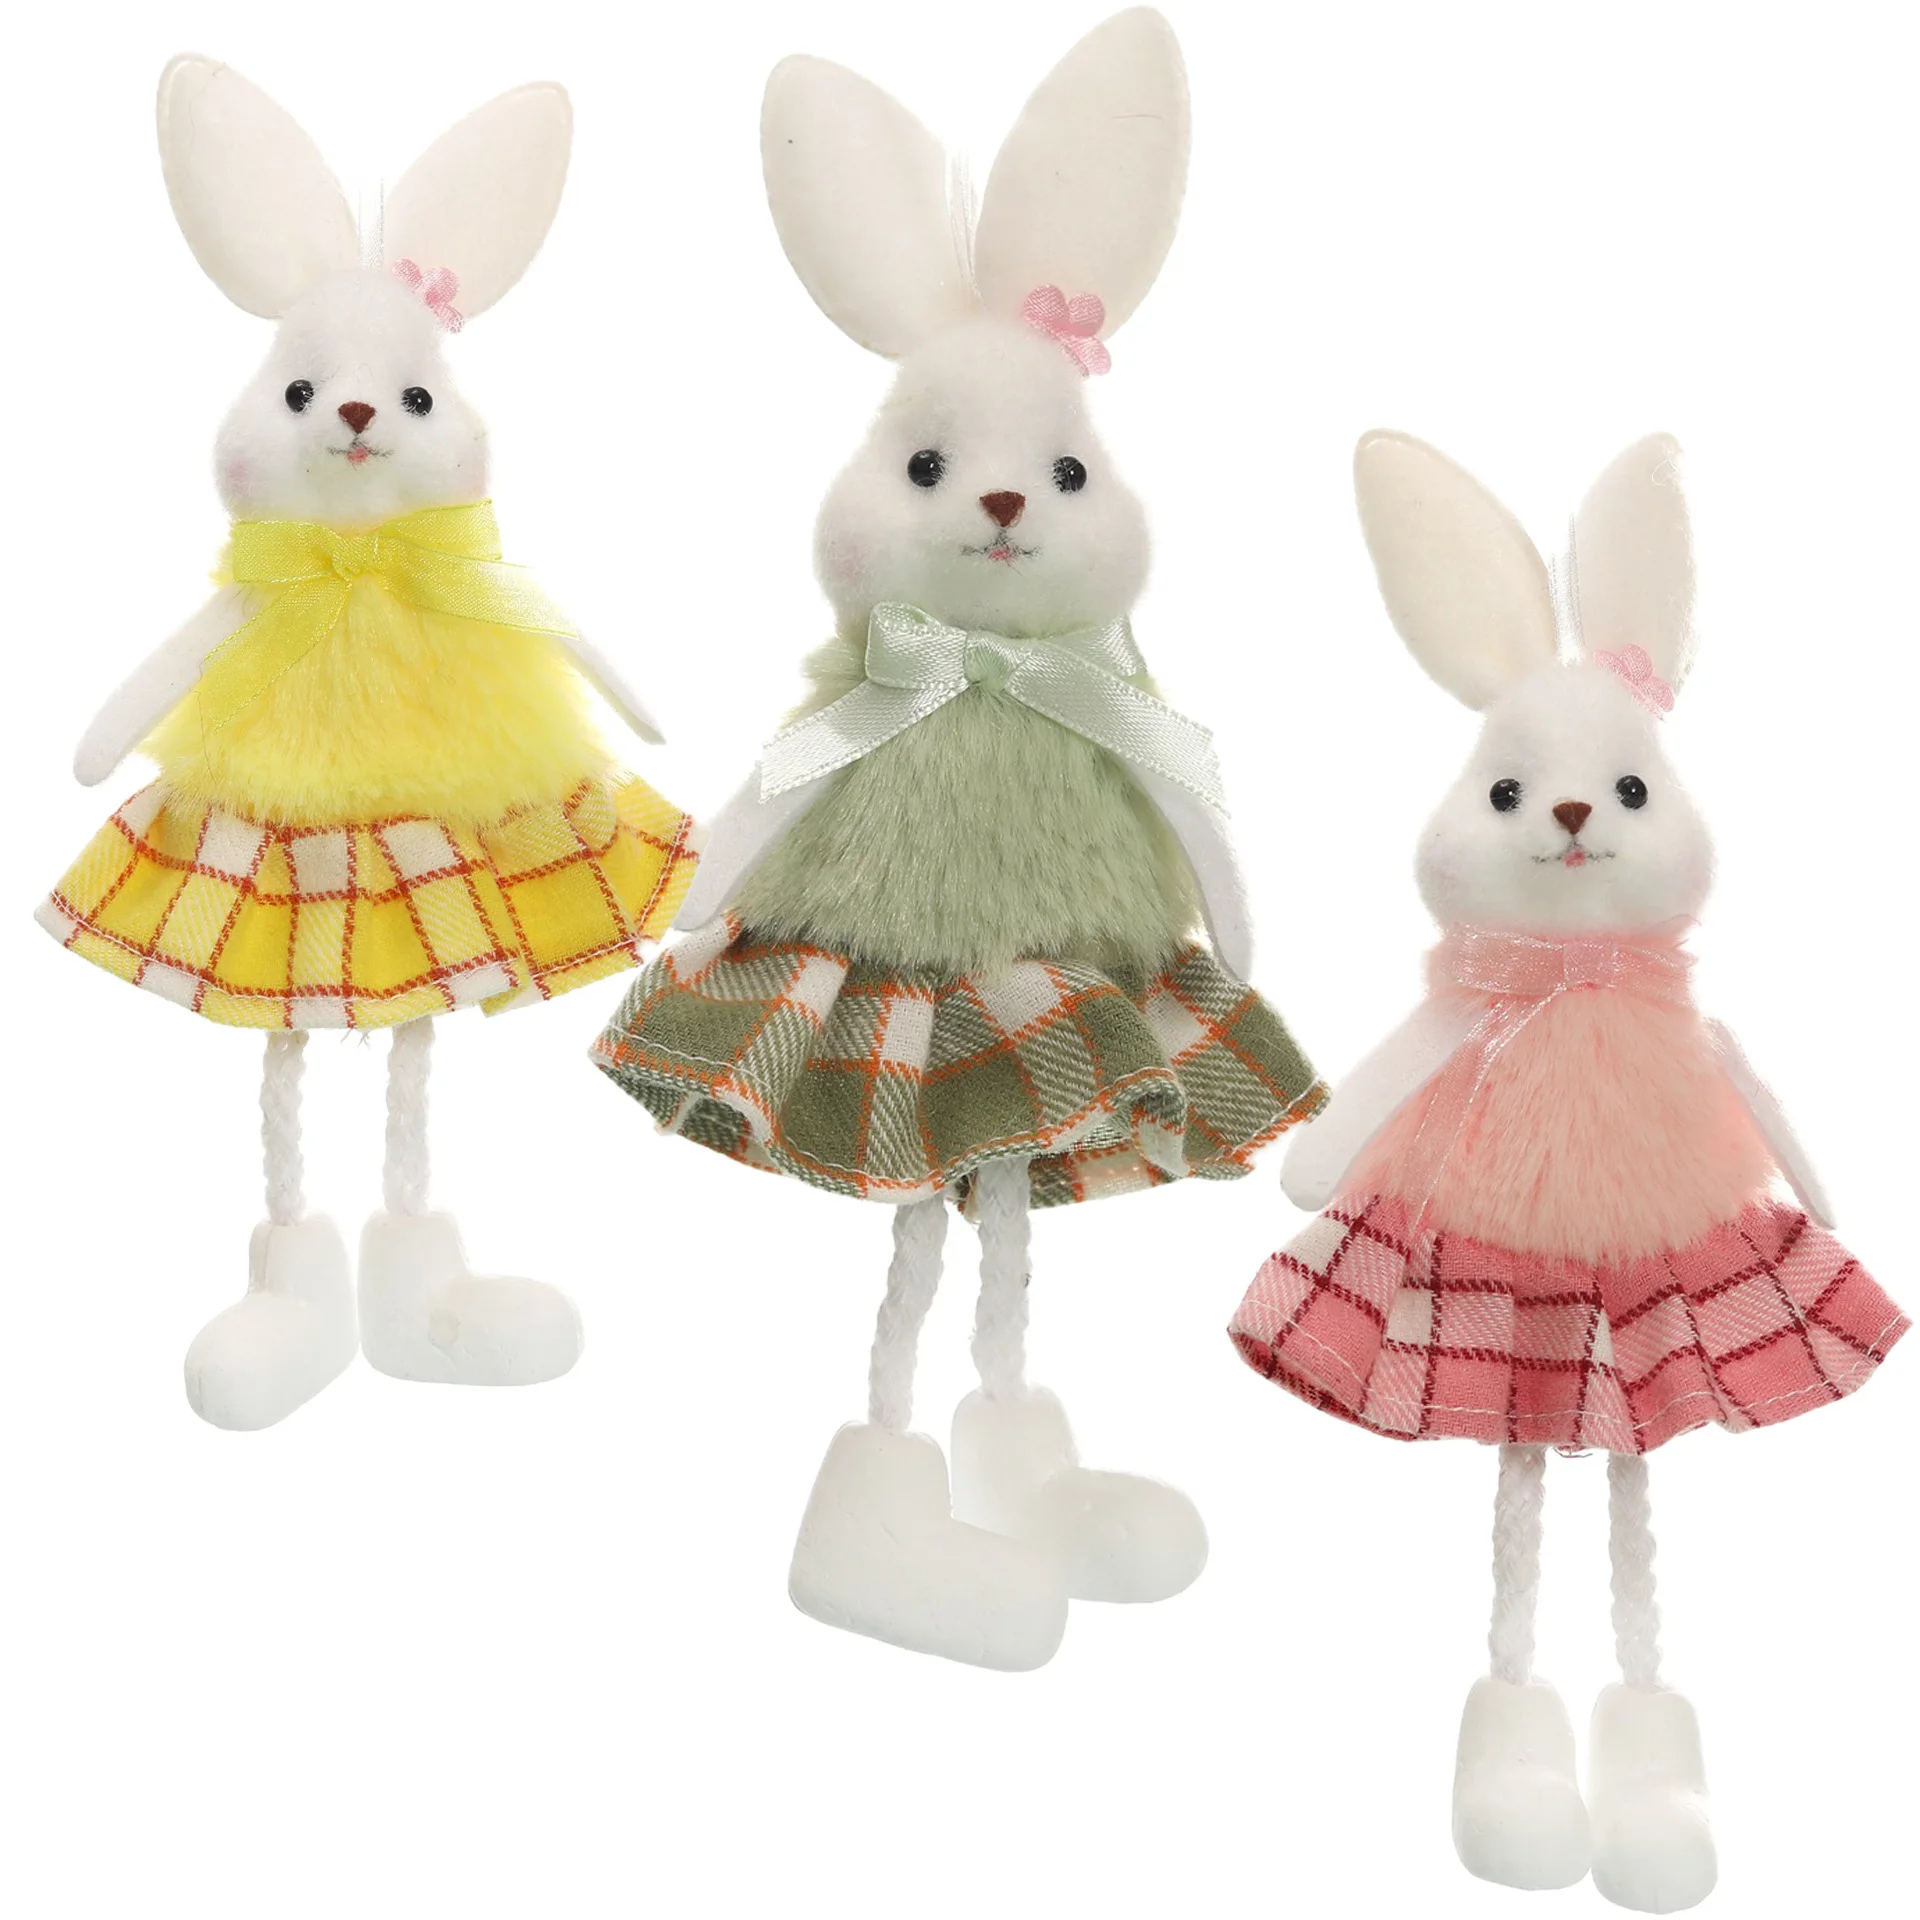 

3Pcs Bunny Figurines Resin Rabbit Statues Sculptures Easter Shelf Sitters Table Decorations Centerpieces Kids Birthday Decor